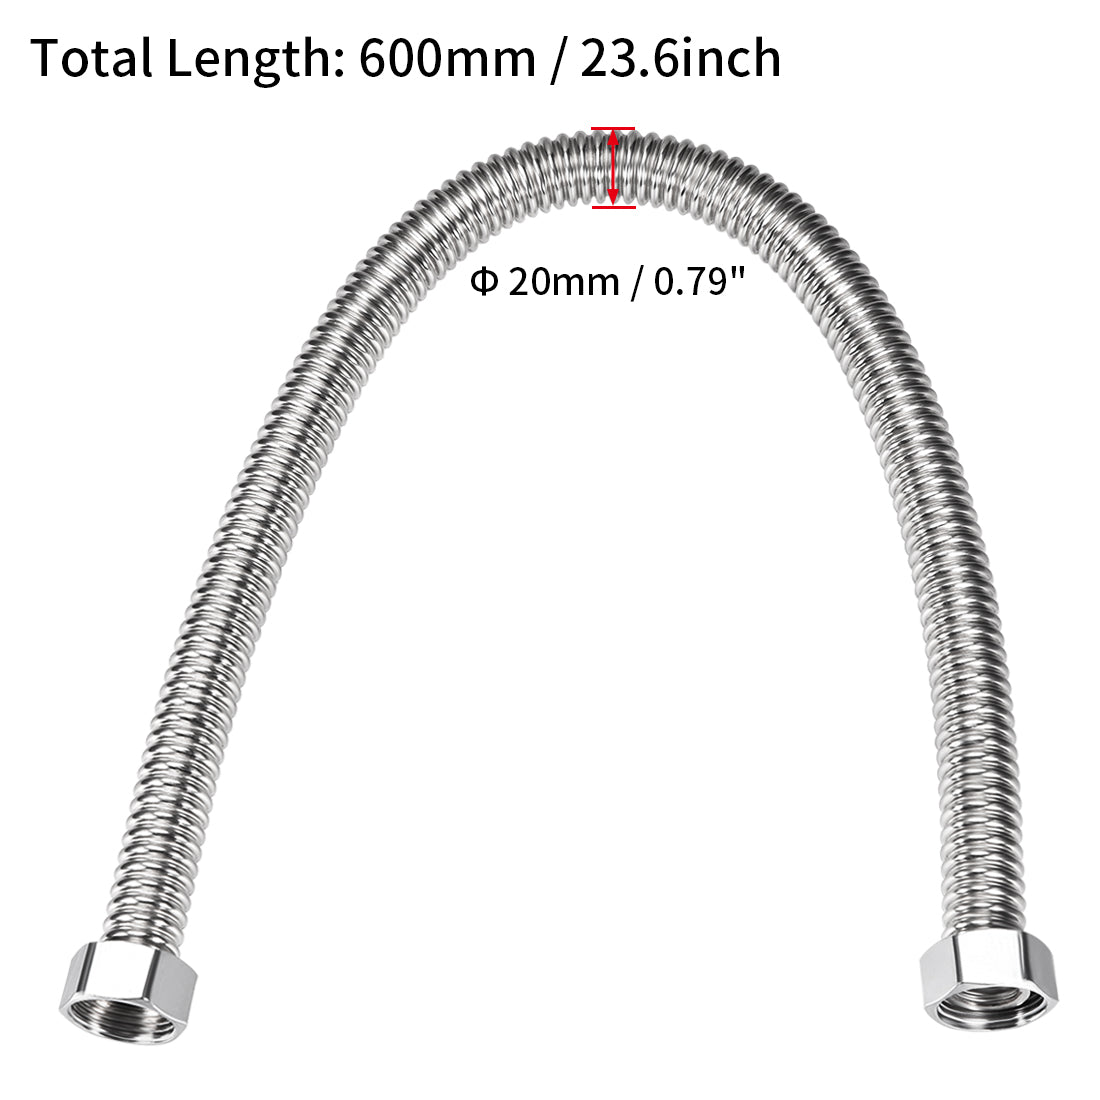 uxcell Uxcell Corrugated Stainless Steel Flexible Water Line 23.6inch Long G3/4 Female Threaded Connector with Washer , 2pcs